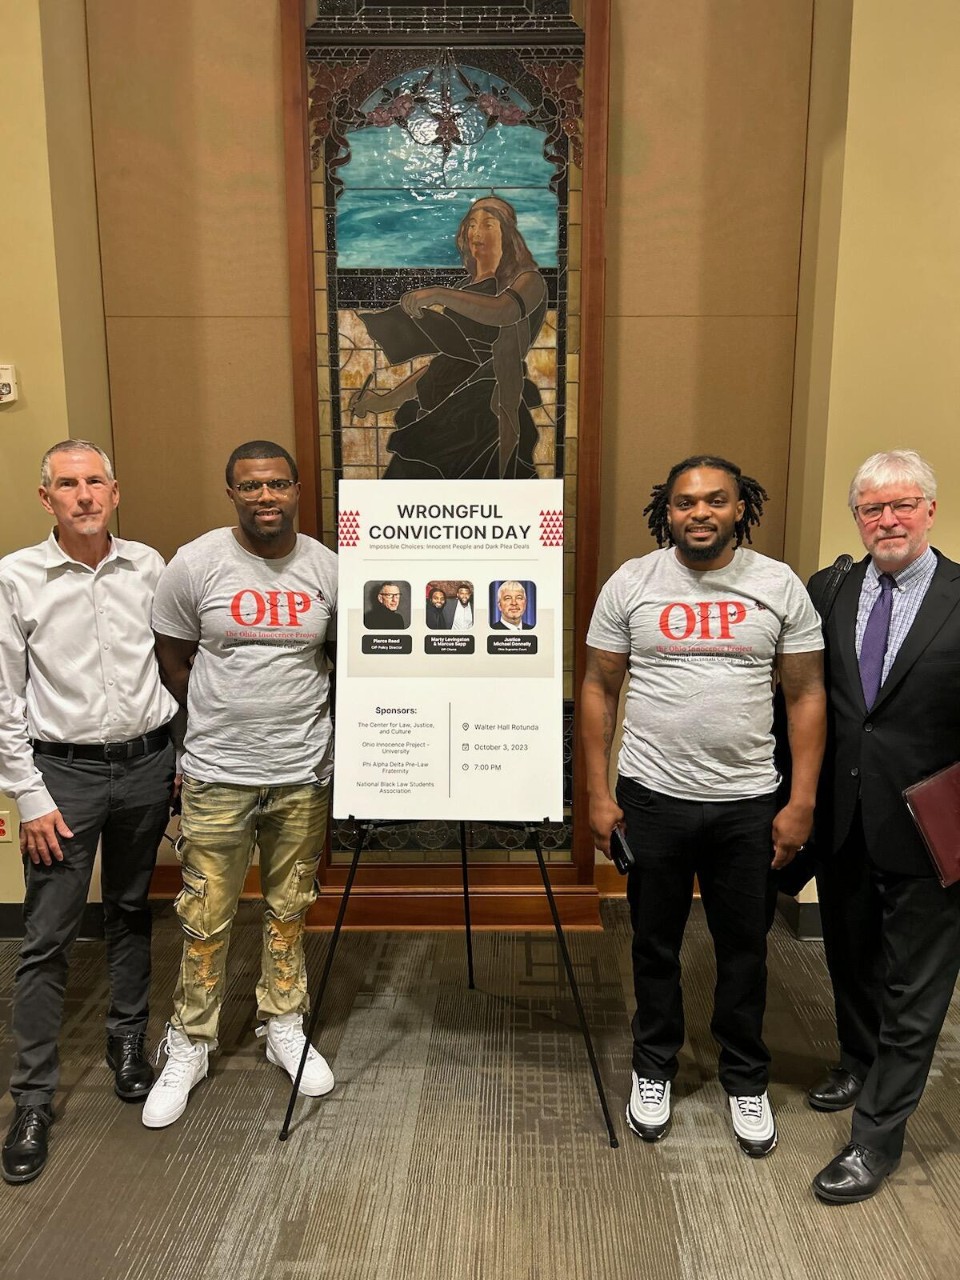 OIP's Pierce Reed is shown standing next to Marcus Sapp, marty Levingston and Justice Michael Donnelly.